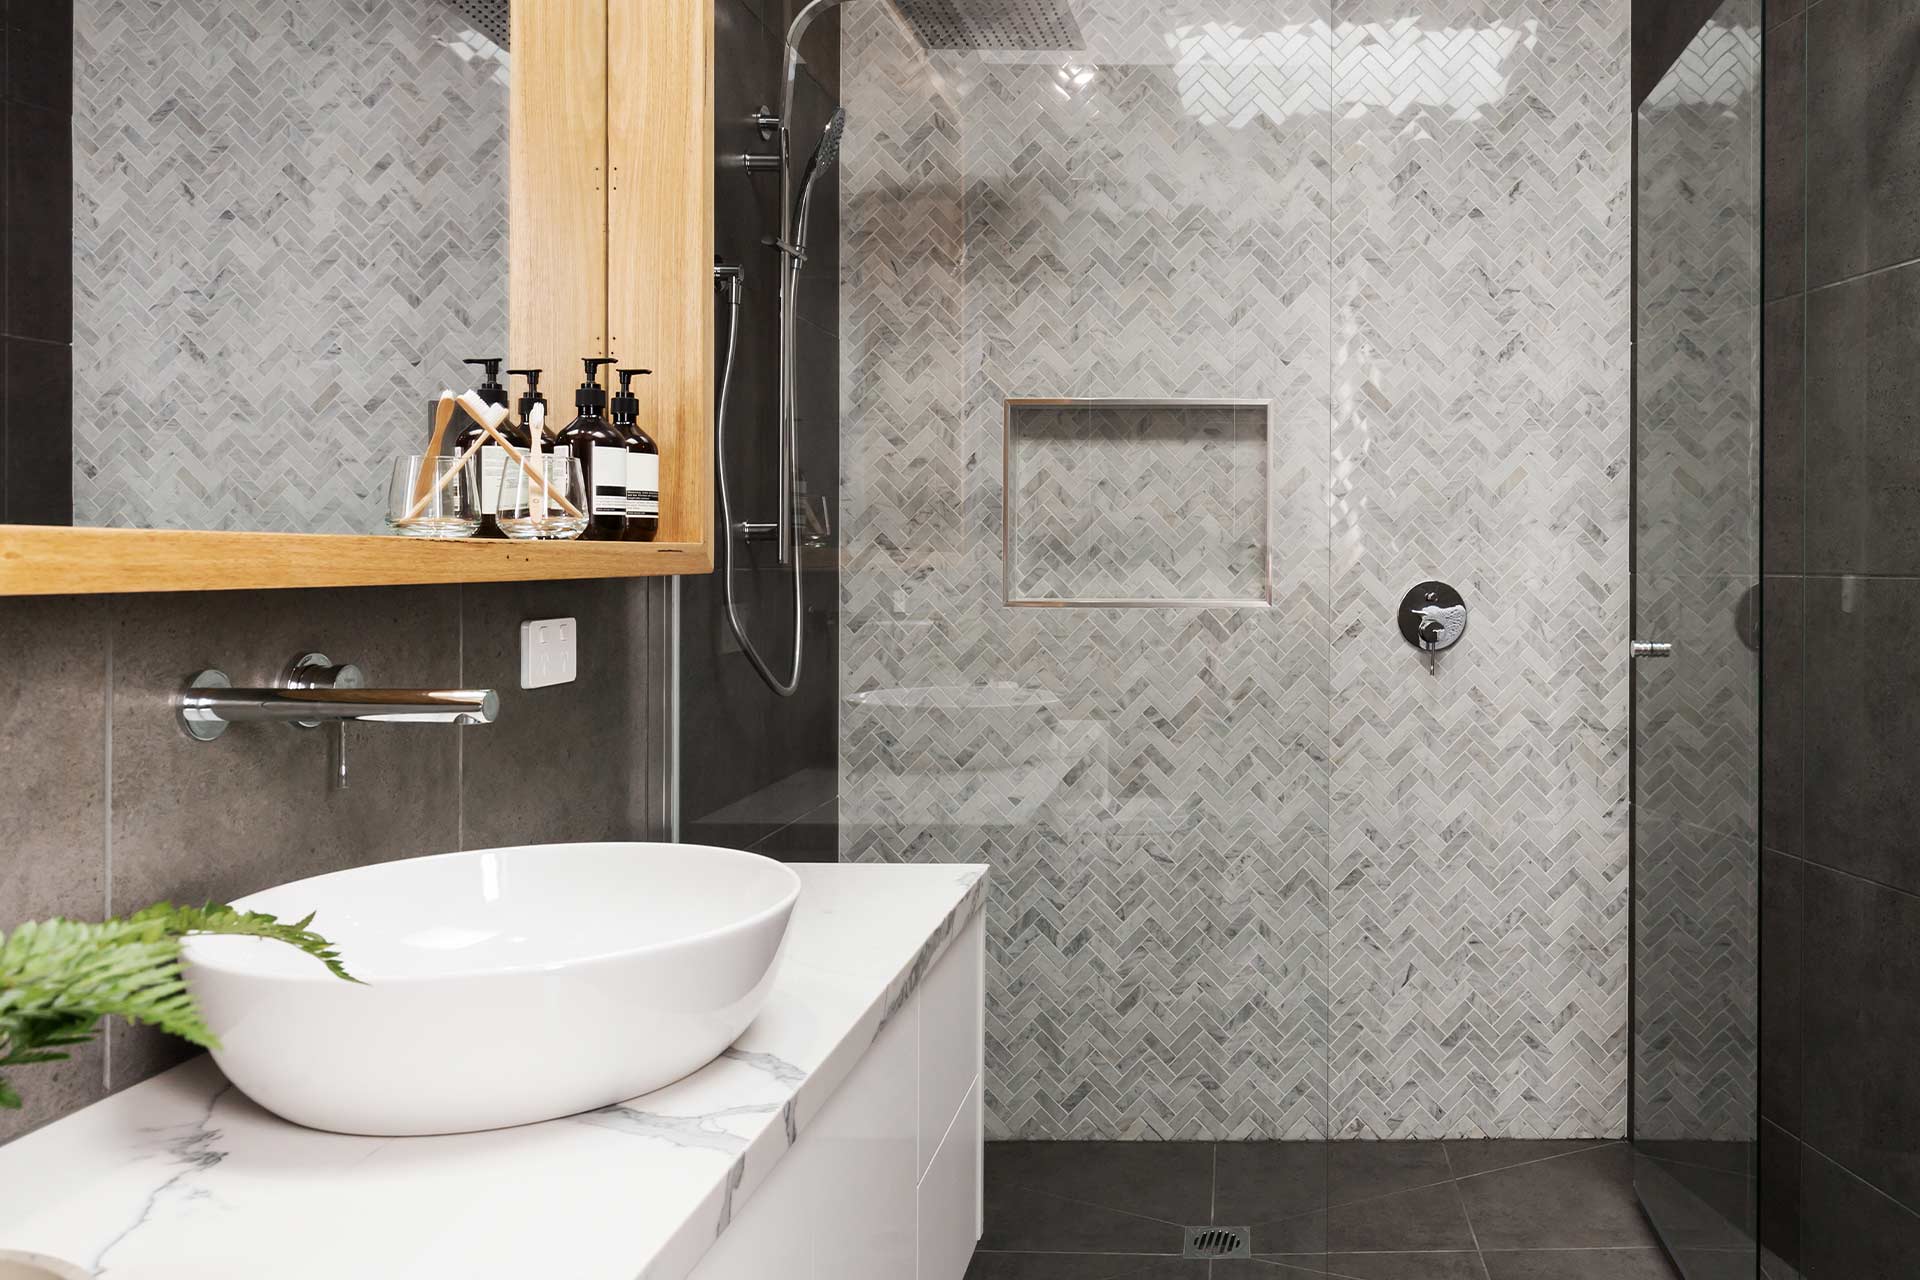 Small Bathroom Shower Tile Ideas: 10 Looks That Stretch Space